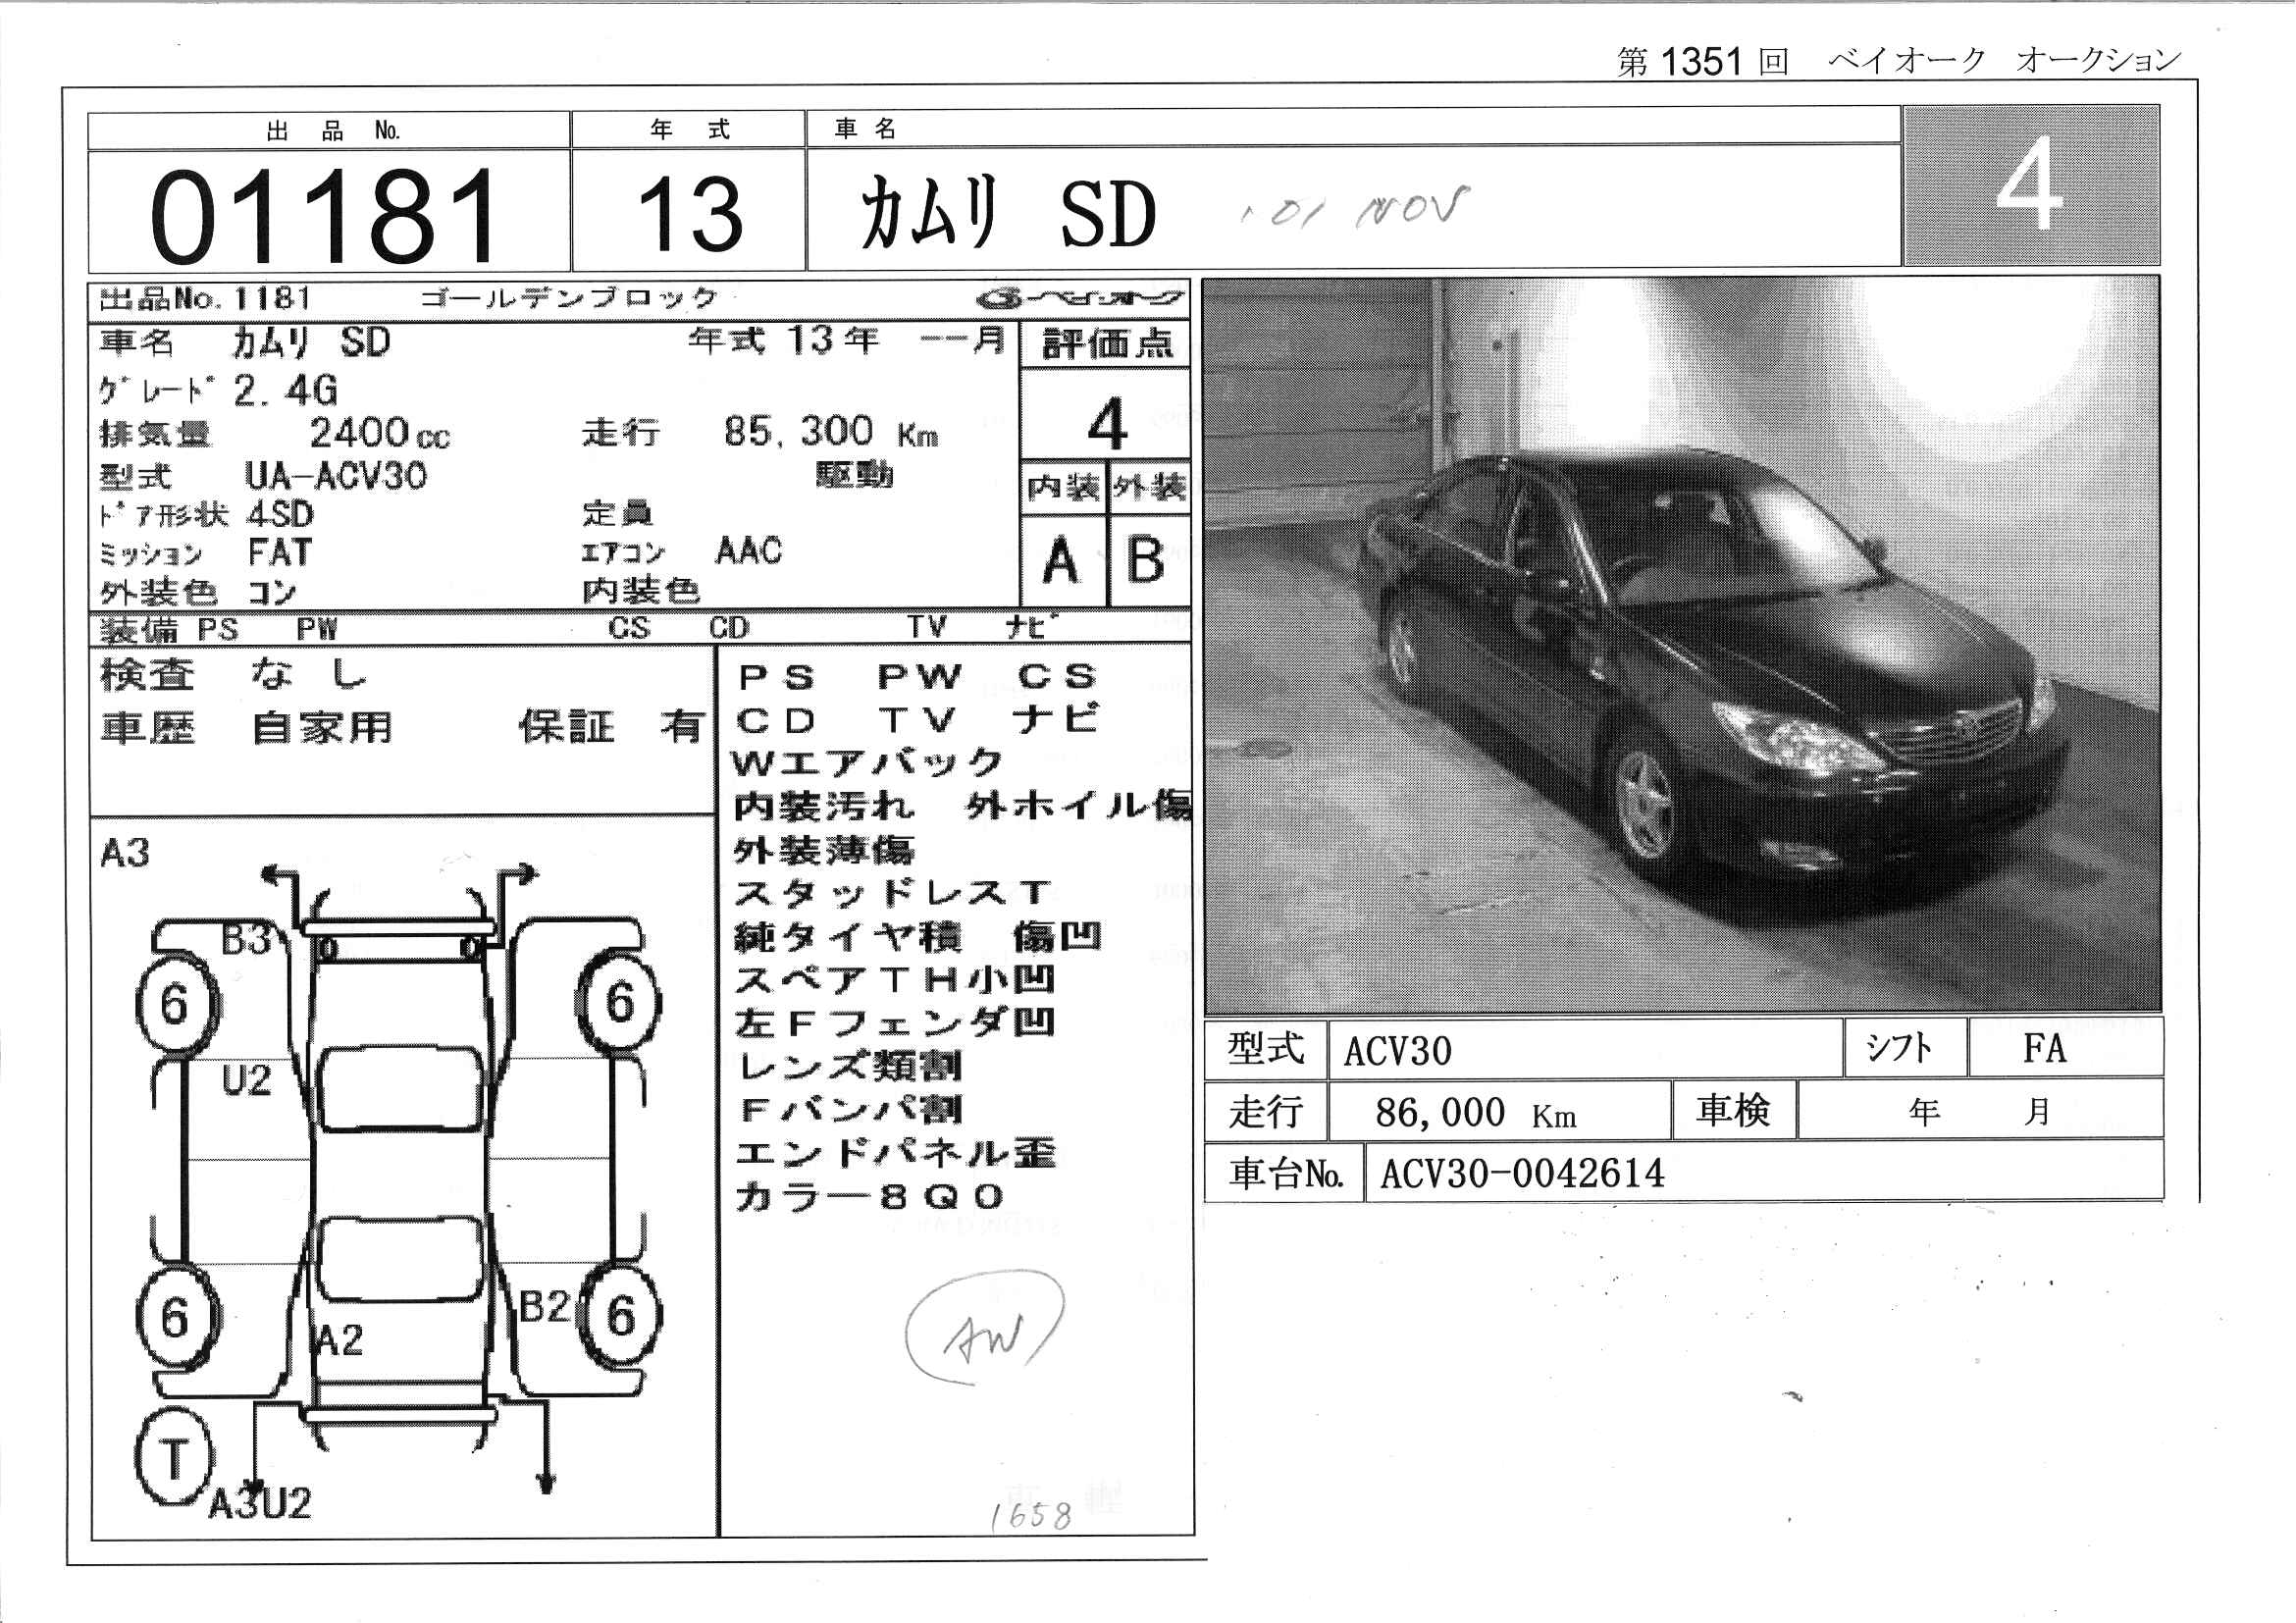 2001 Toyota Camry Pictures